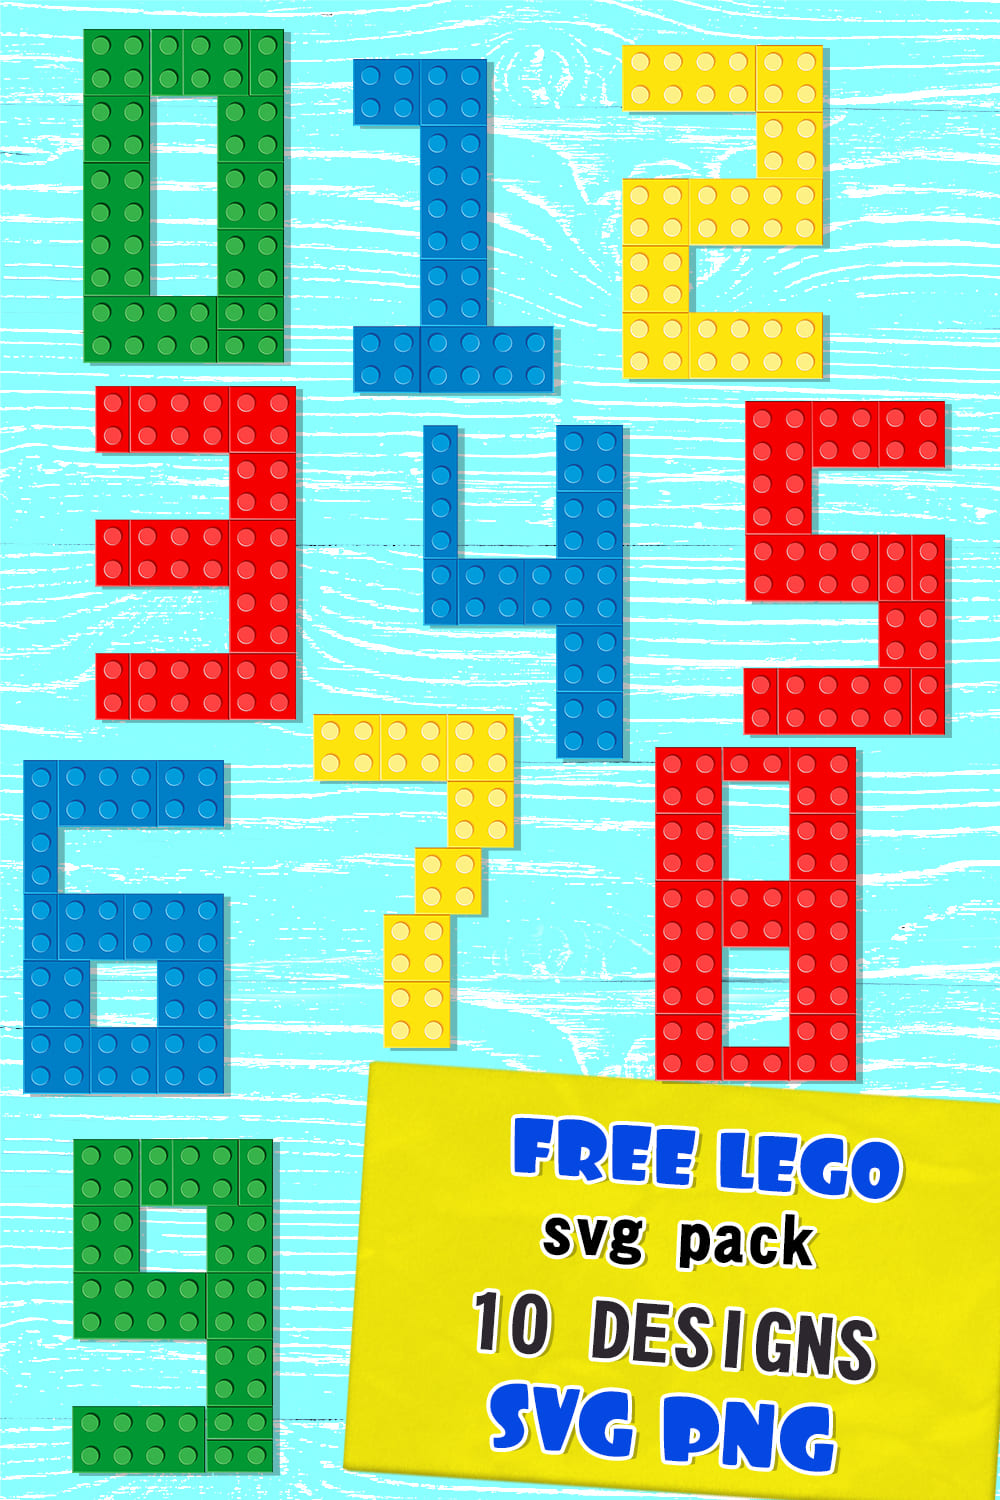 Free lego svg - pinterest image preview.